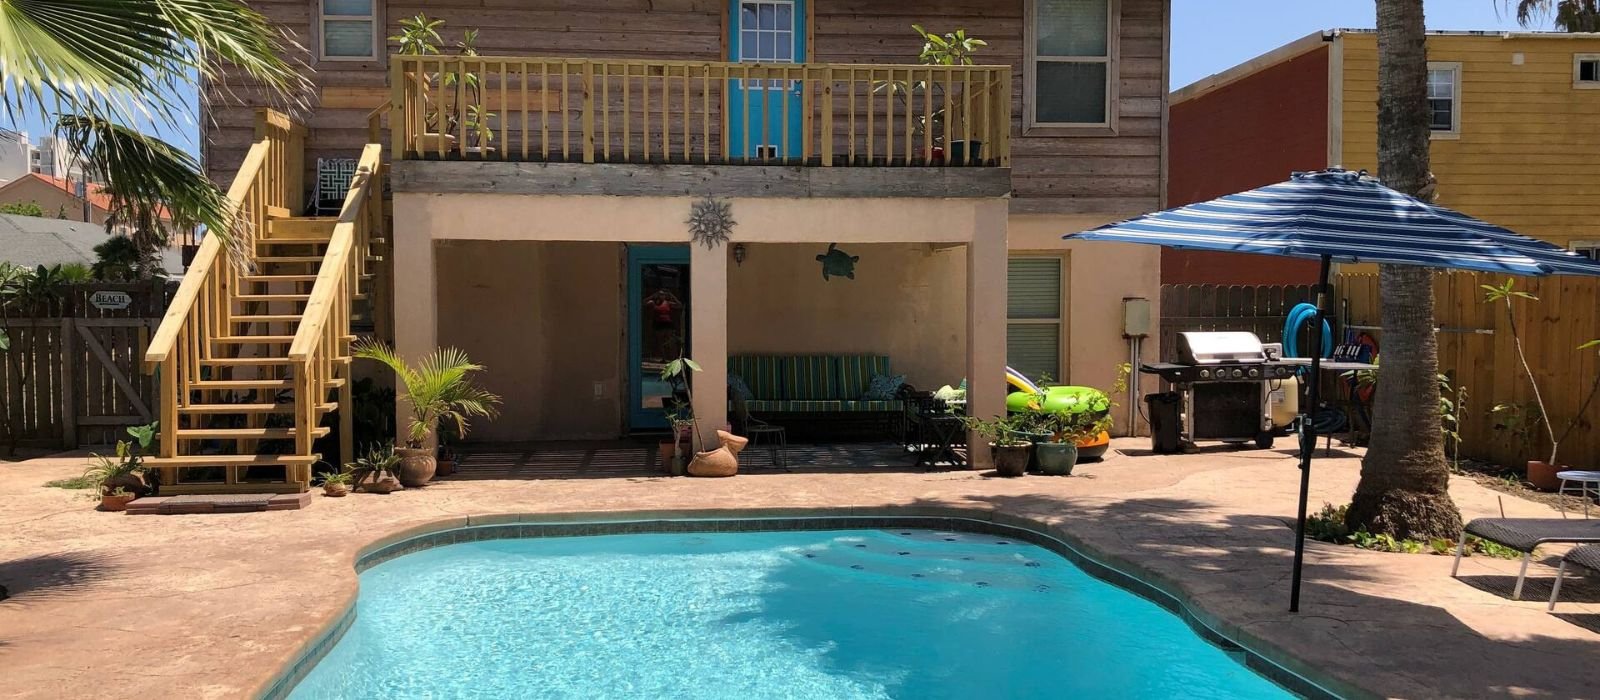 Best Airbnb South Padre Island